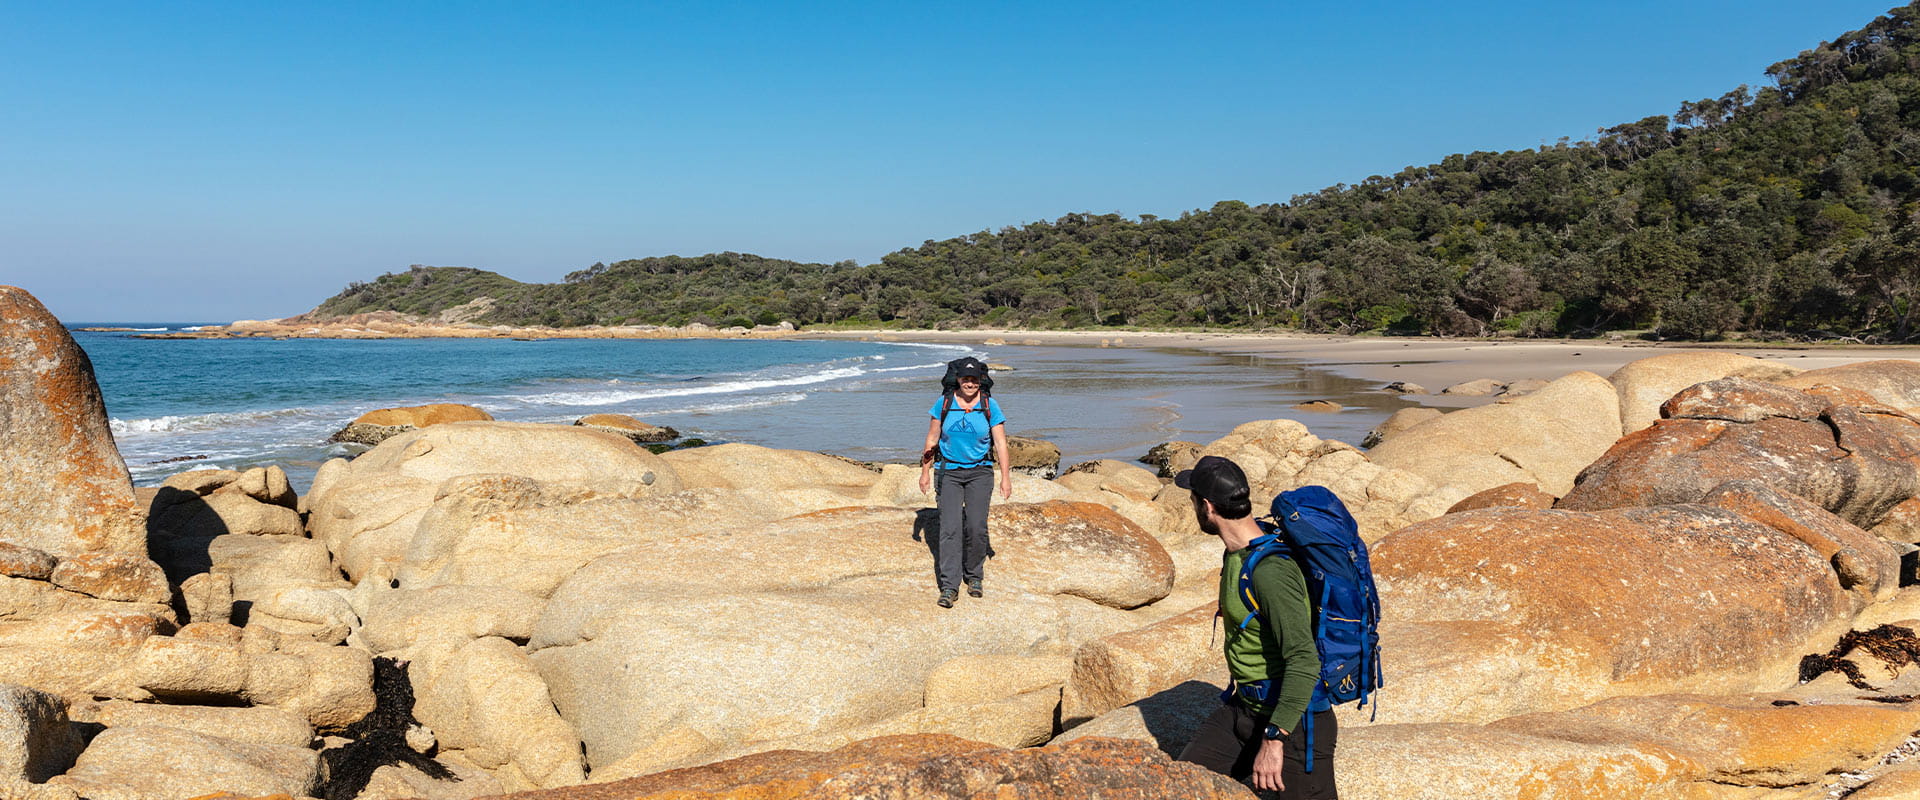 A man waits for his female hiking partner as they walk through a pile of rocks at one end of a sandy bay with the water in the background